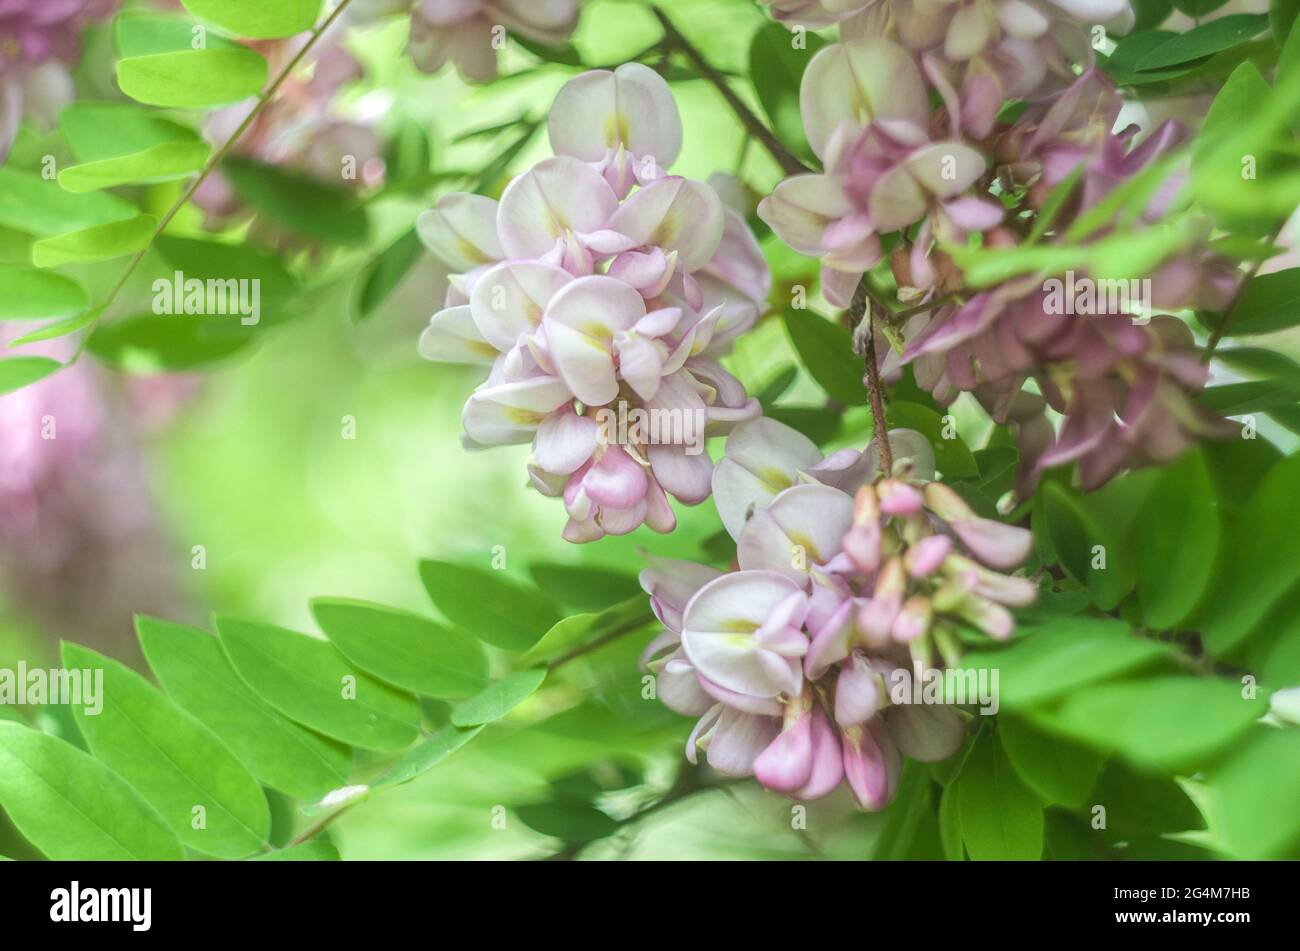 Acacia pink flower bush on a roaring background. Floral summer photo. Stock Photo